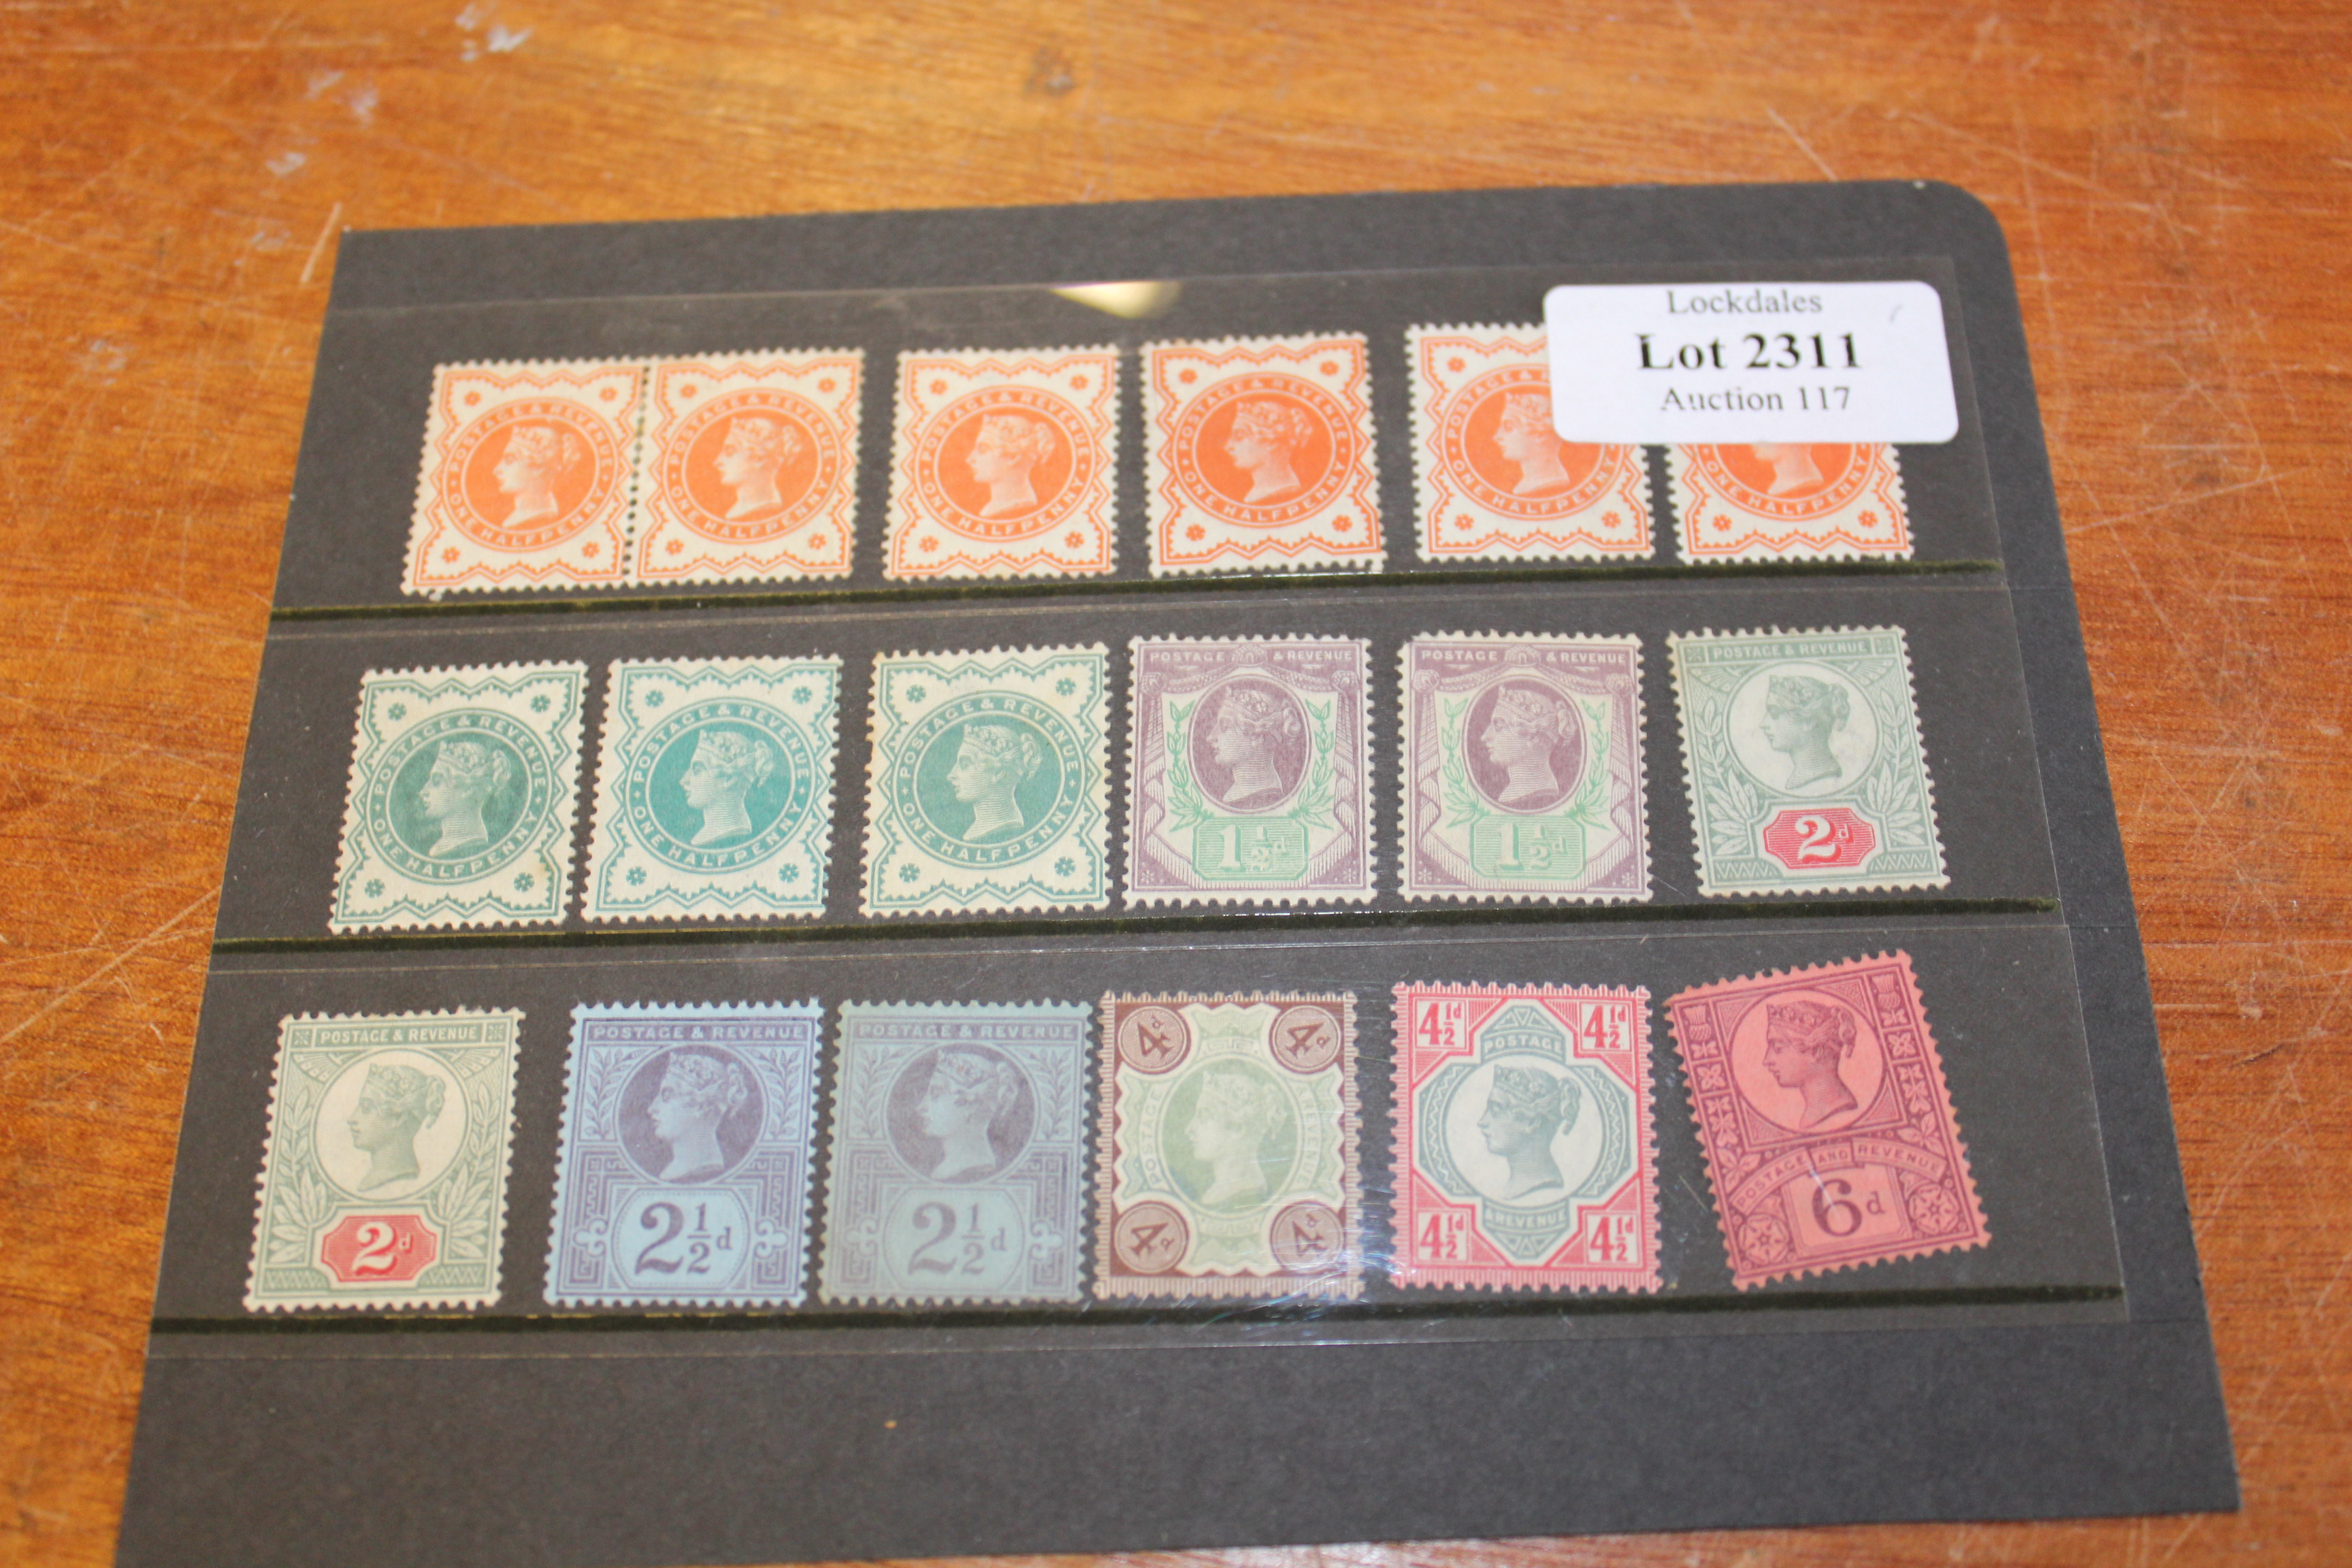 GB 1887 Queen Victoria Jubilee range of mint on sheet some with faults (needs careful viewing)